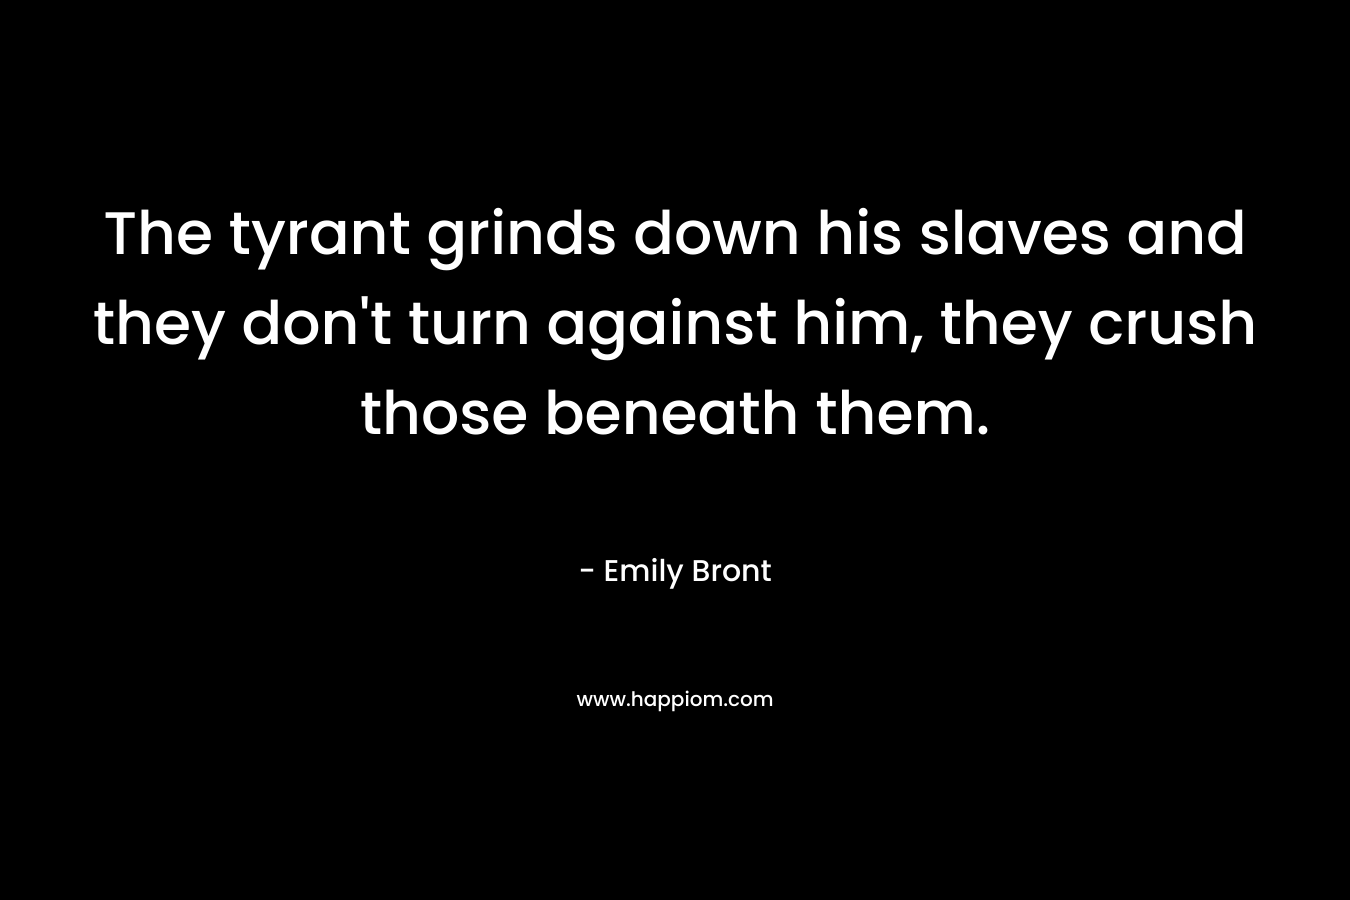 The tyrant grinds down his slaves and they don’t turn against him, they crush those beneath them. – Emily Bront